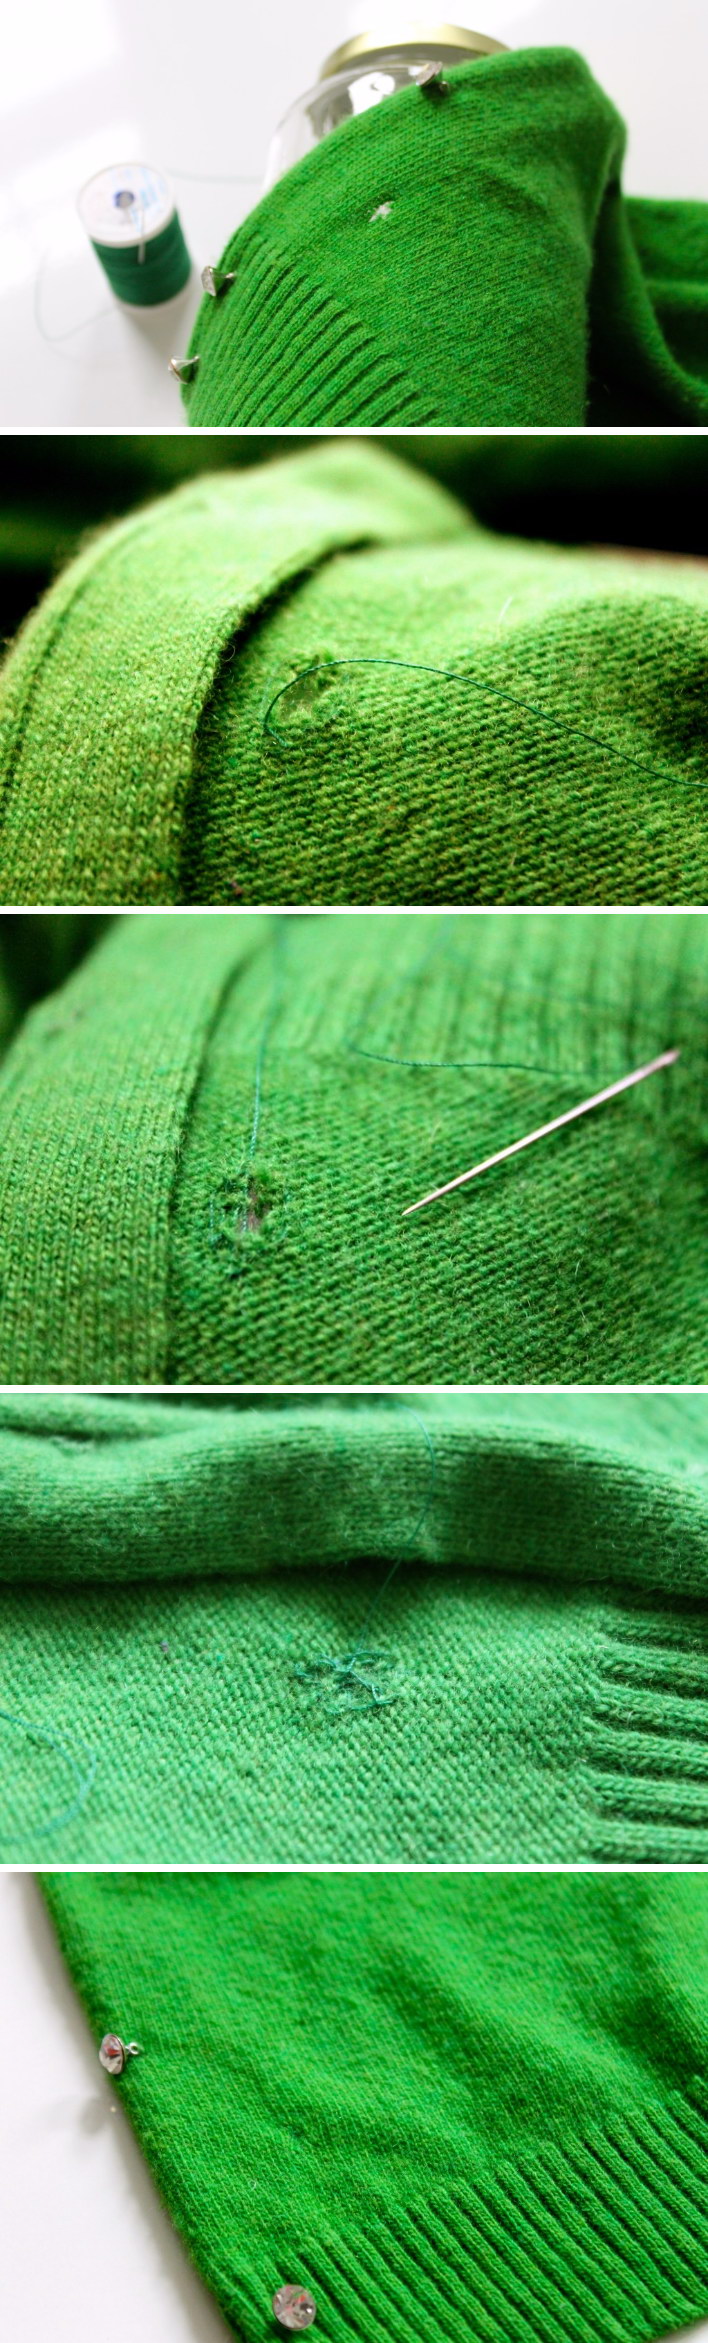 Fix a Hole in a Woolen Sweater with Thread Using Vertical Stitches. 